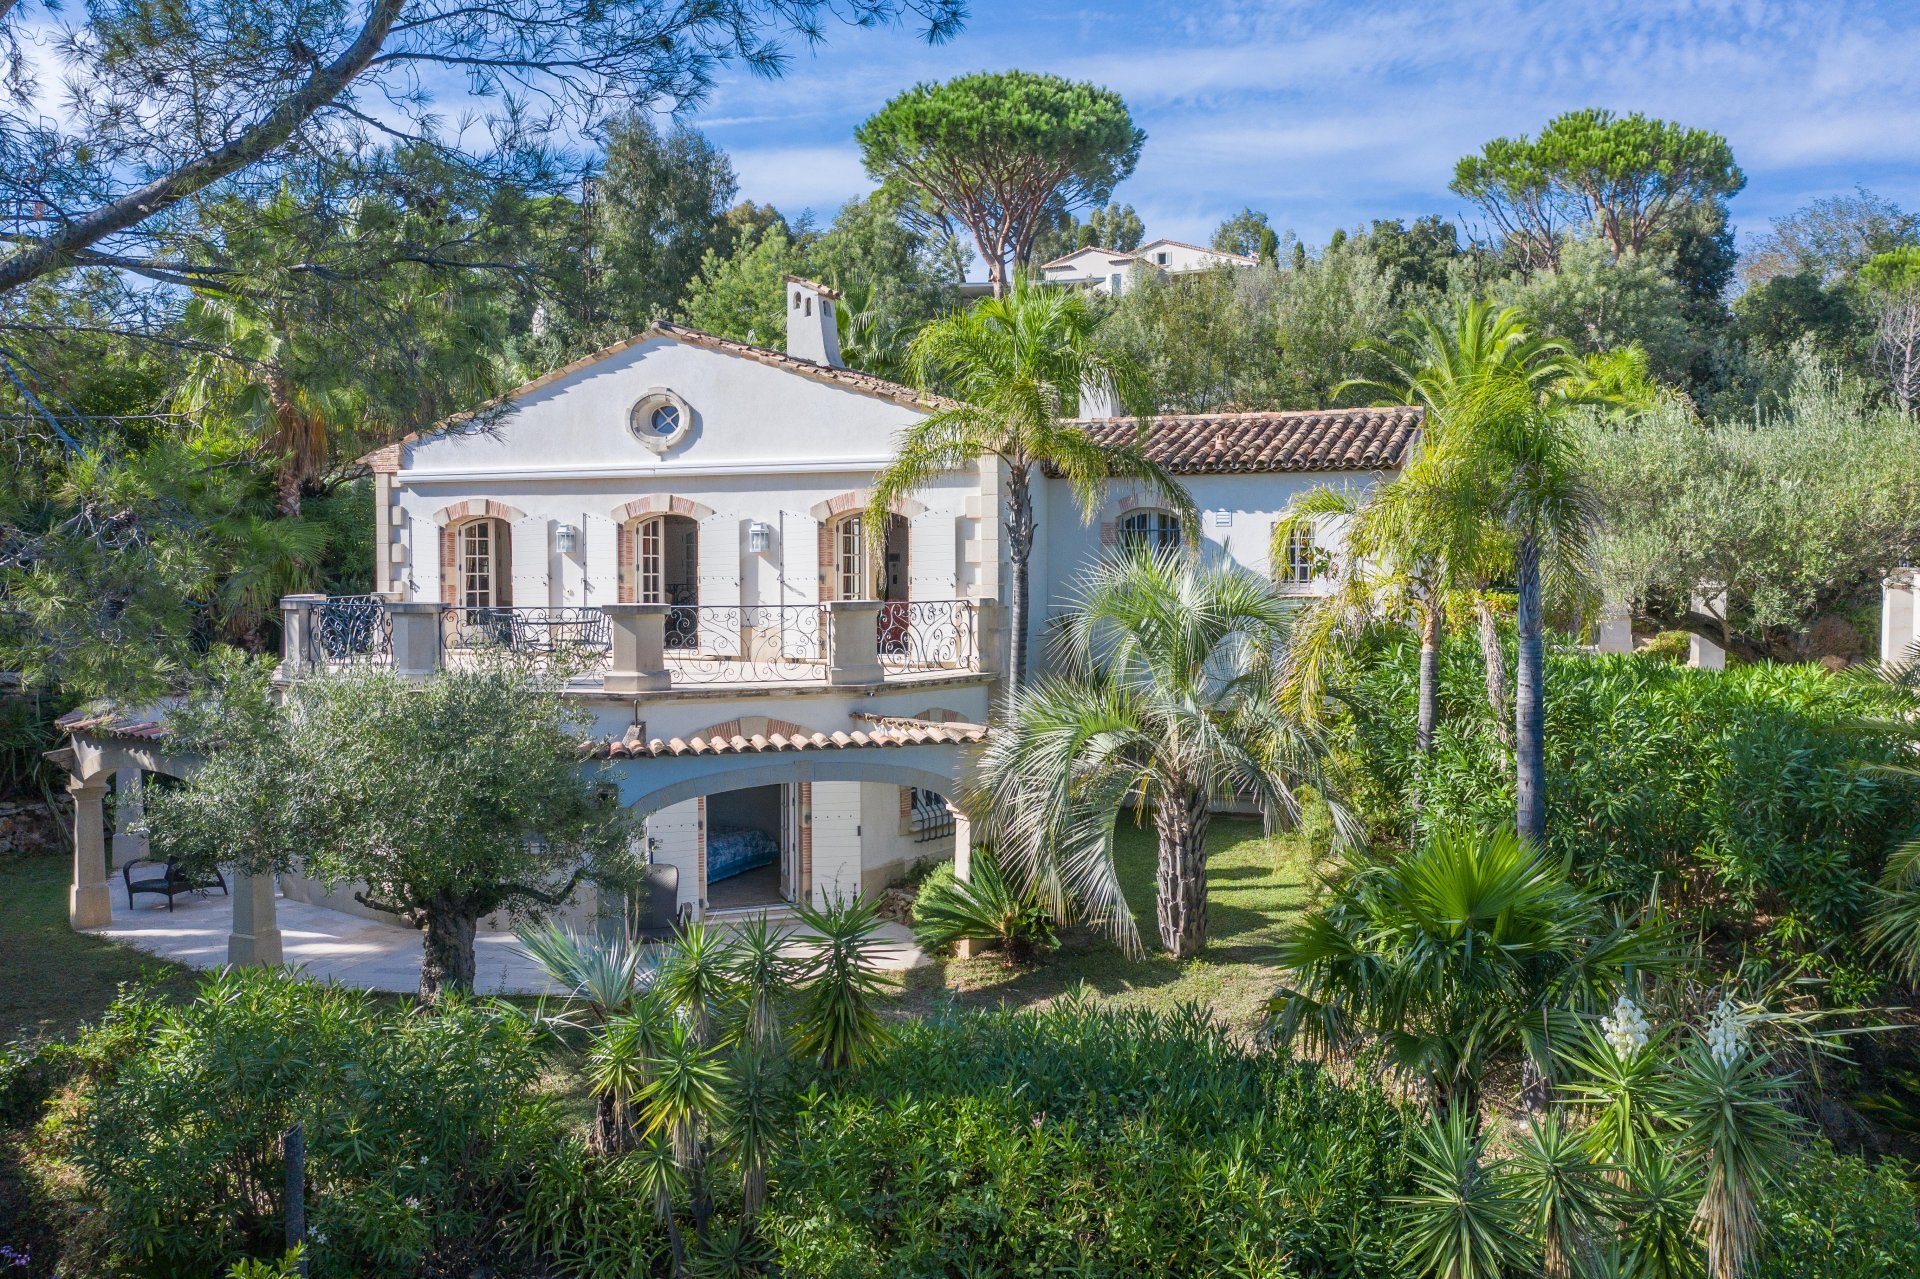 Francis York Iconic French Riviera Villa Overlooking the Bay of Saint Tropez 7.jpg